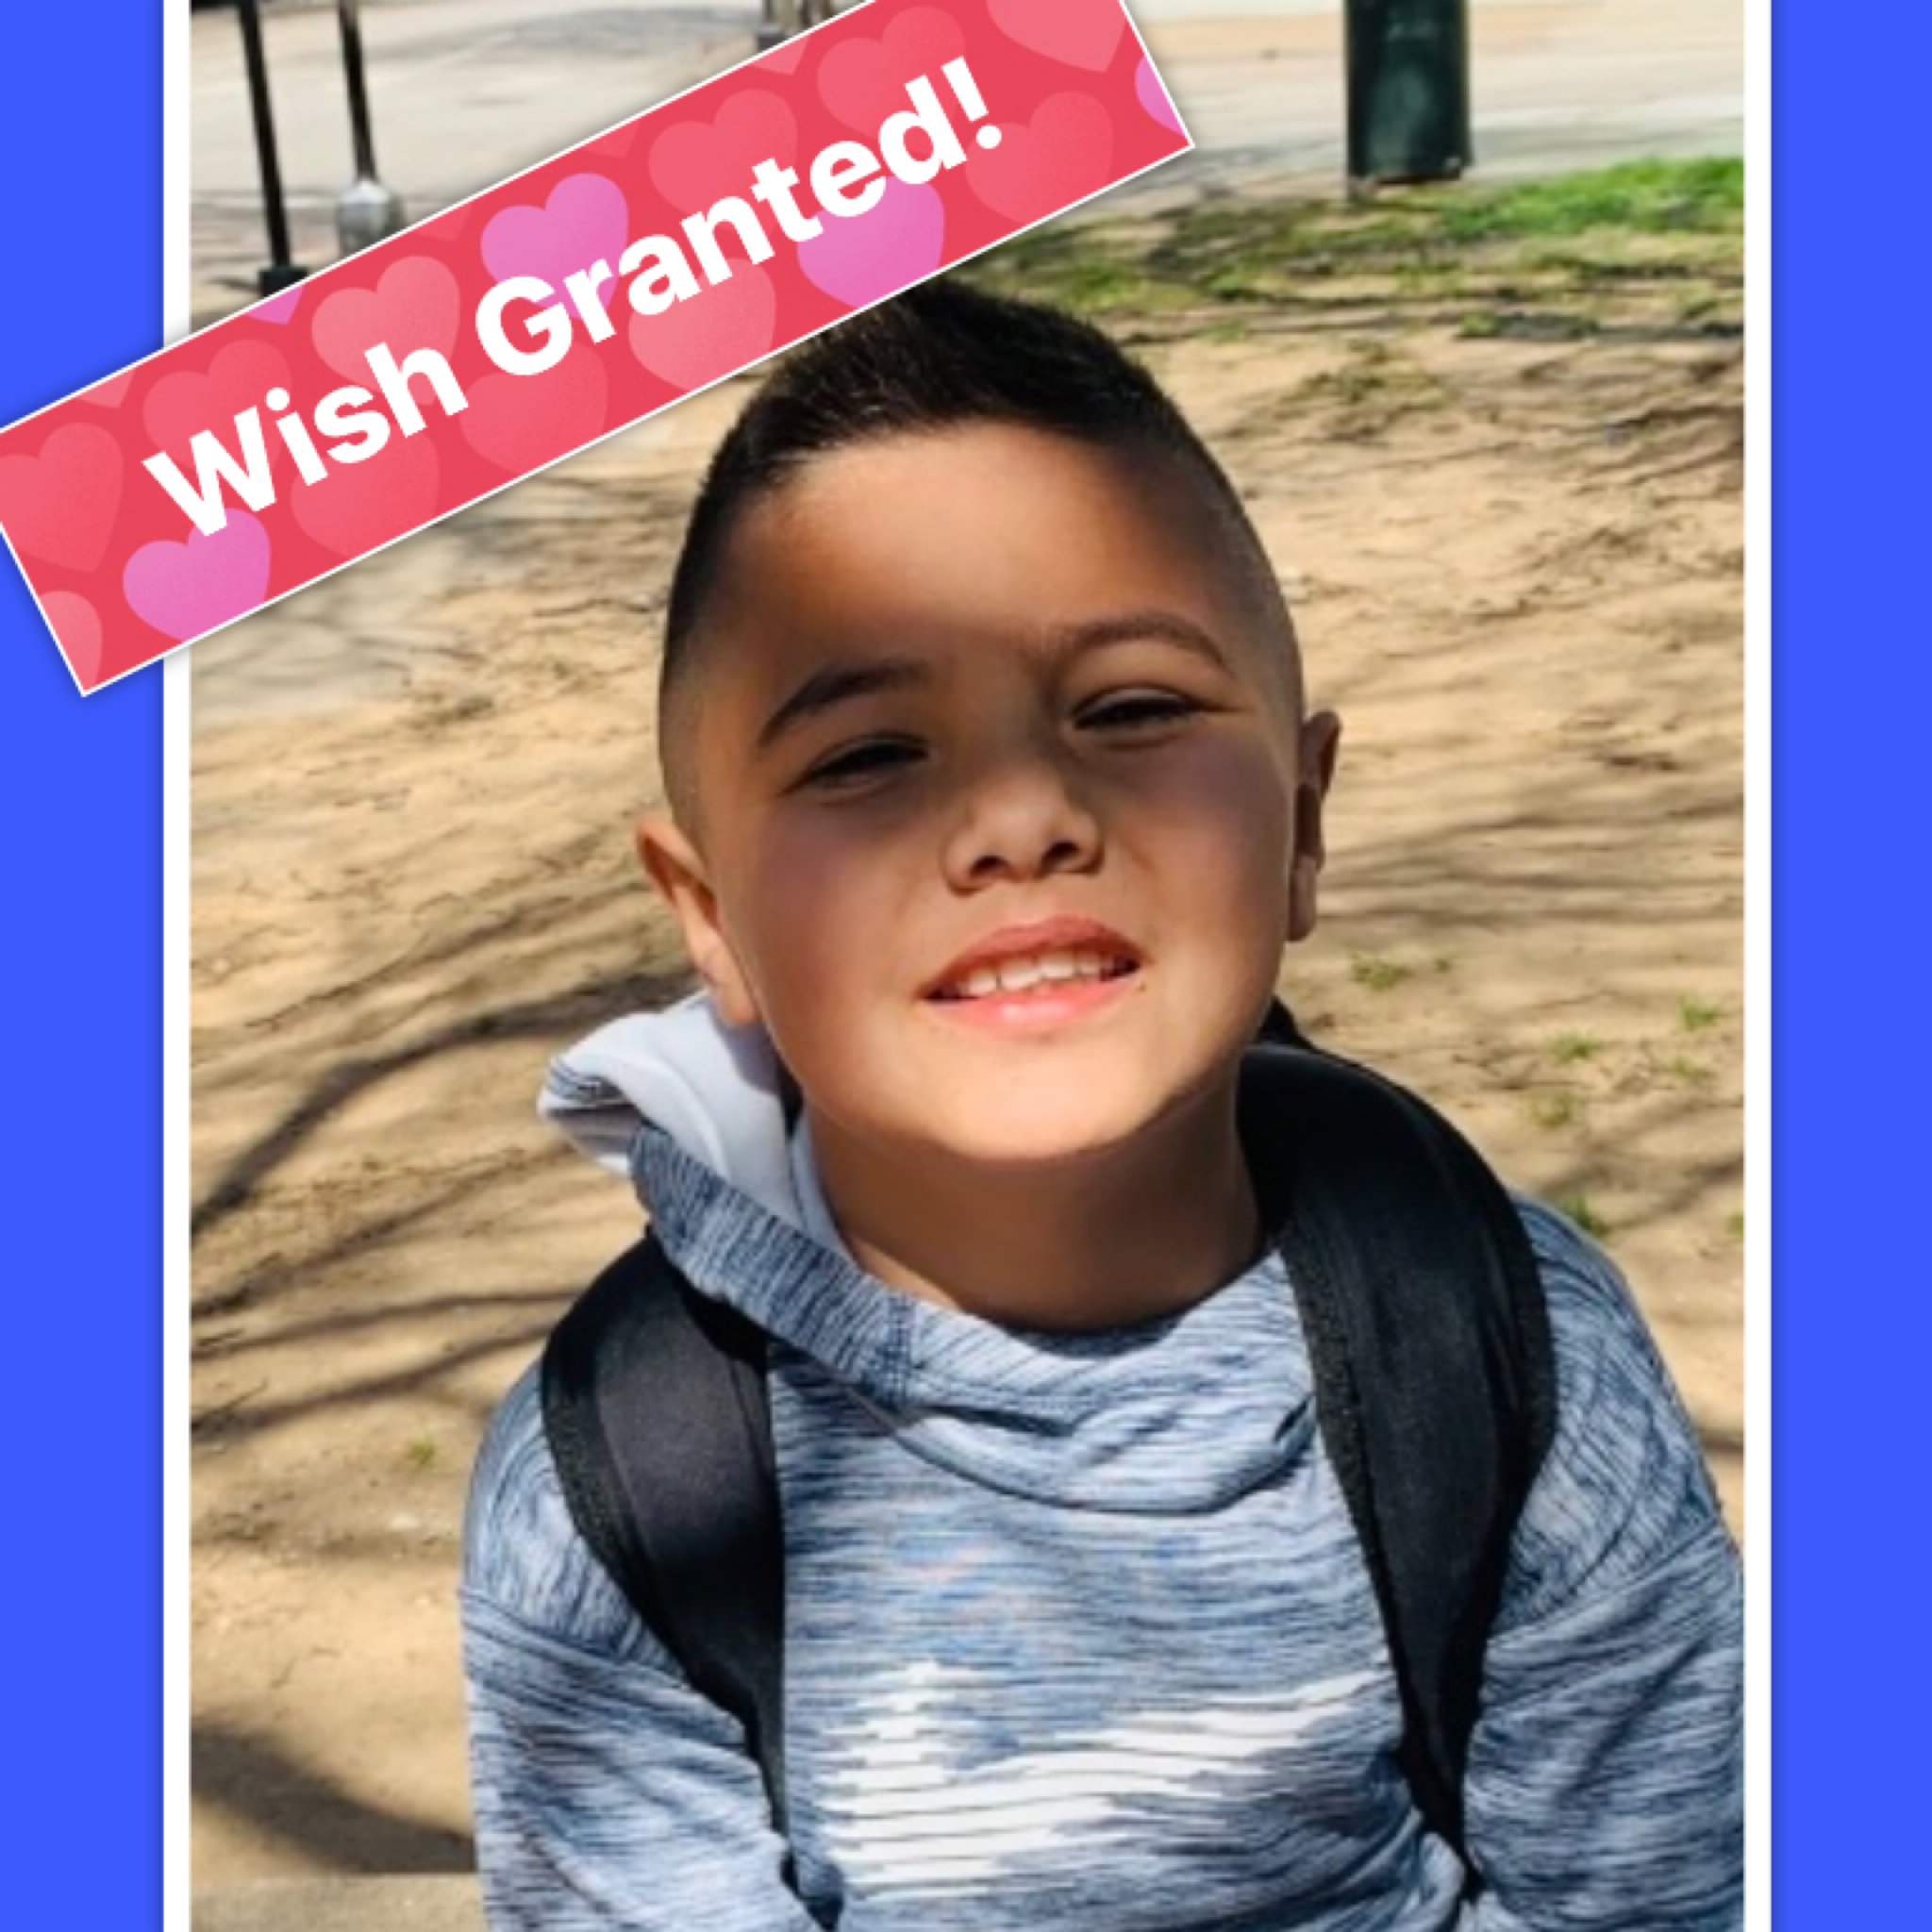 ⭐️ Single mom gets wish granted to help her boy with his education. ⭐